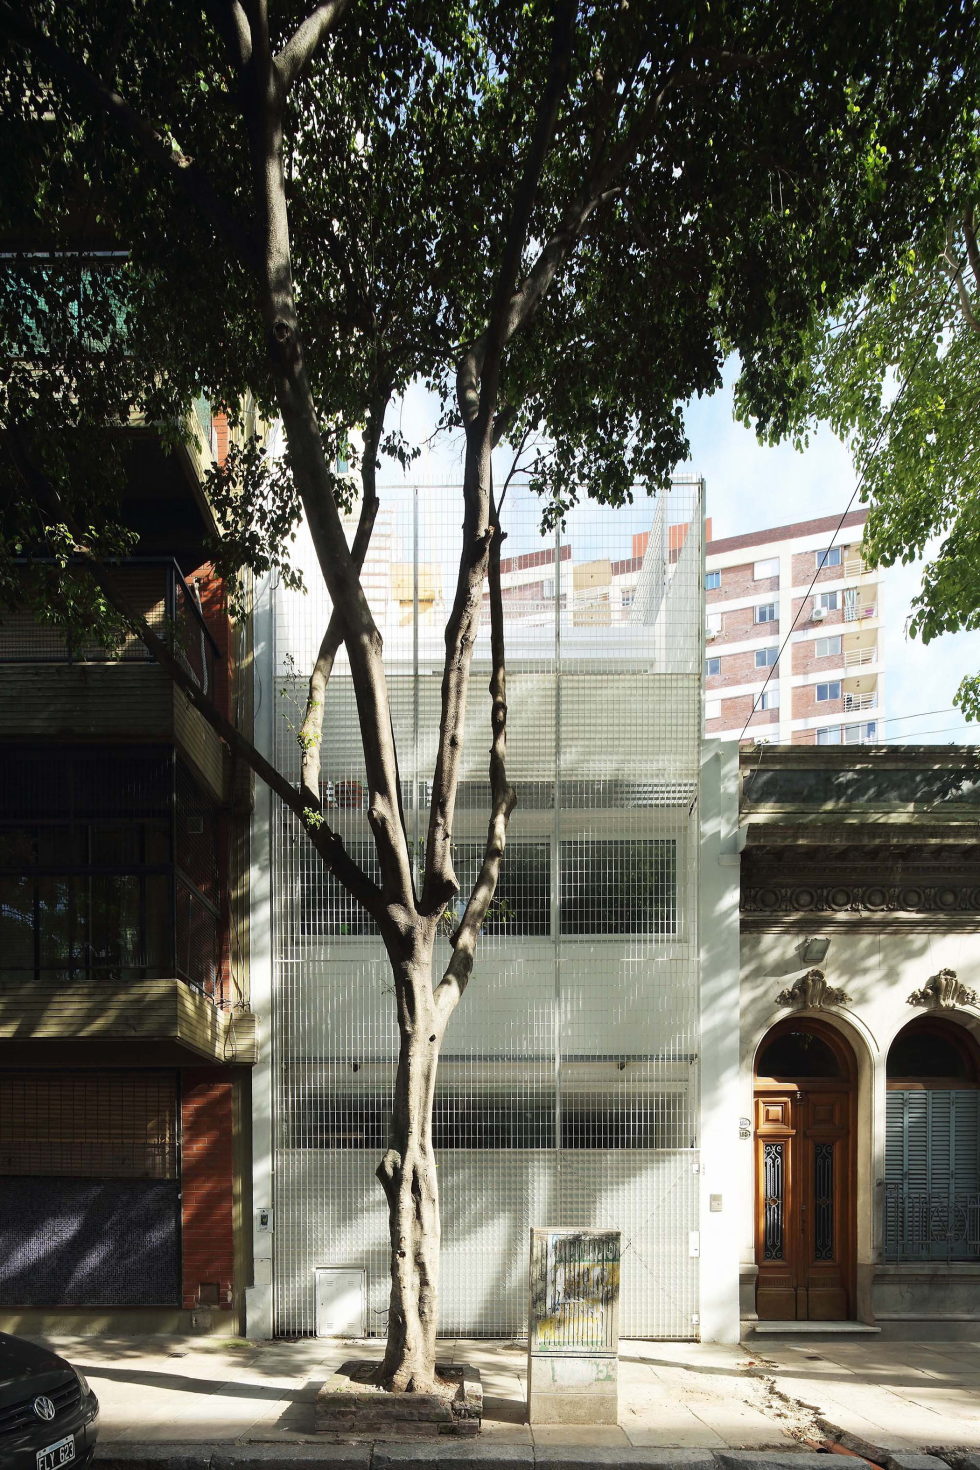 Jauretche House In Buenos Aires upon the project of Colle-Croce 1